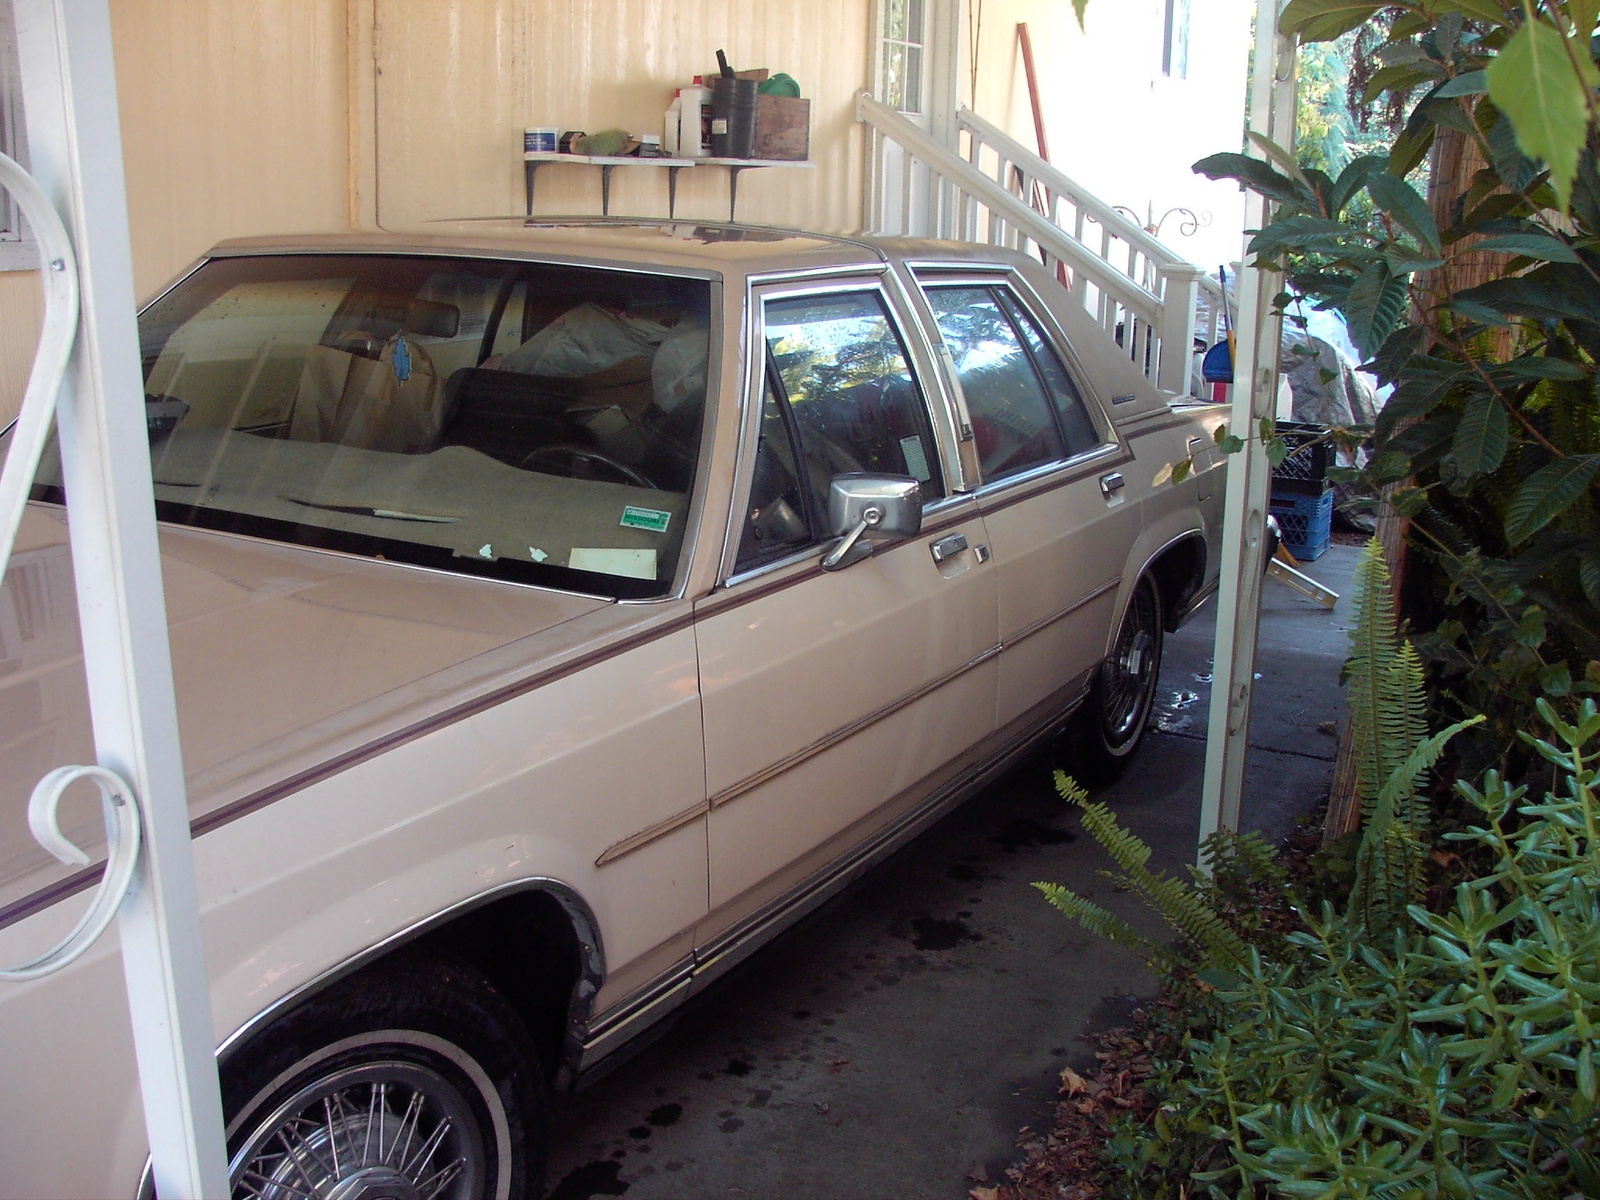 1986 Ford grand marquis #1